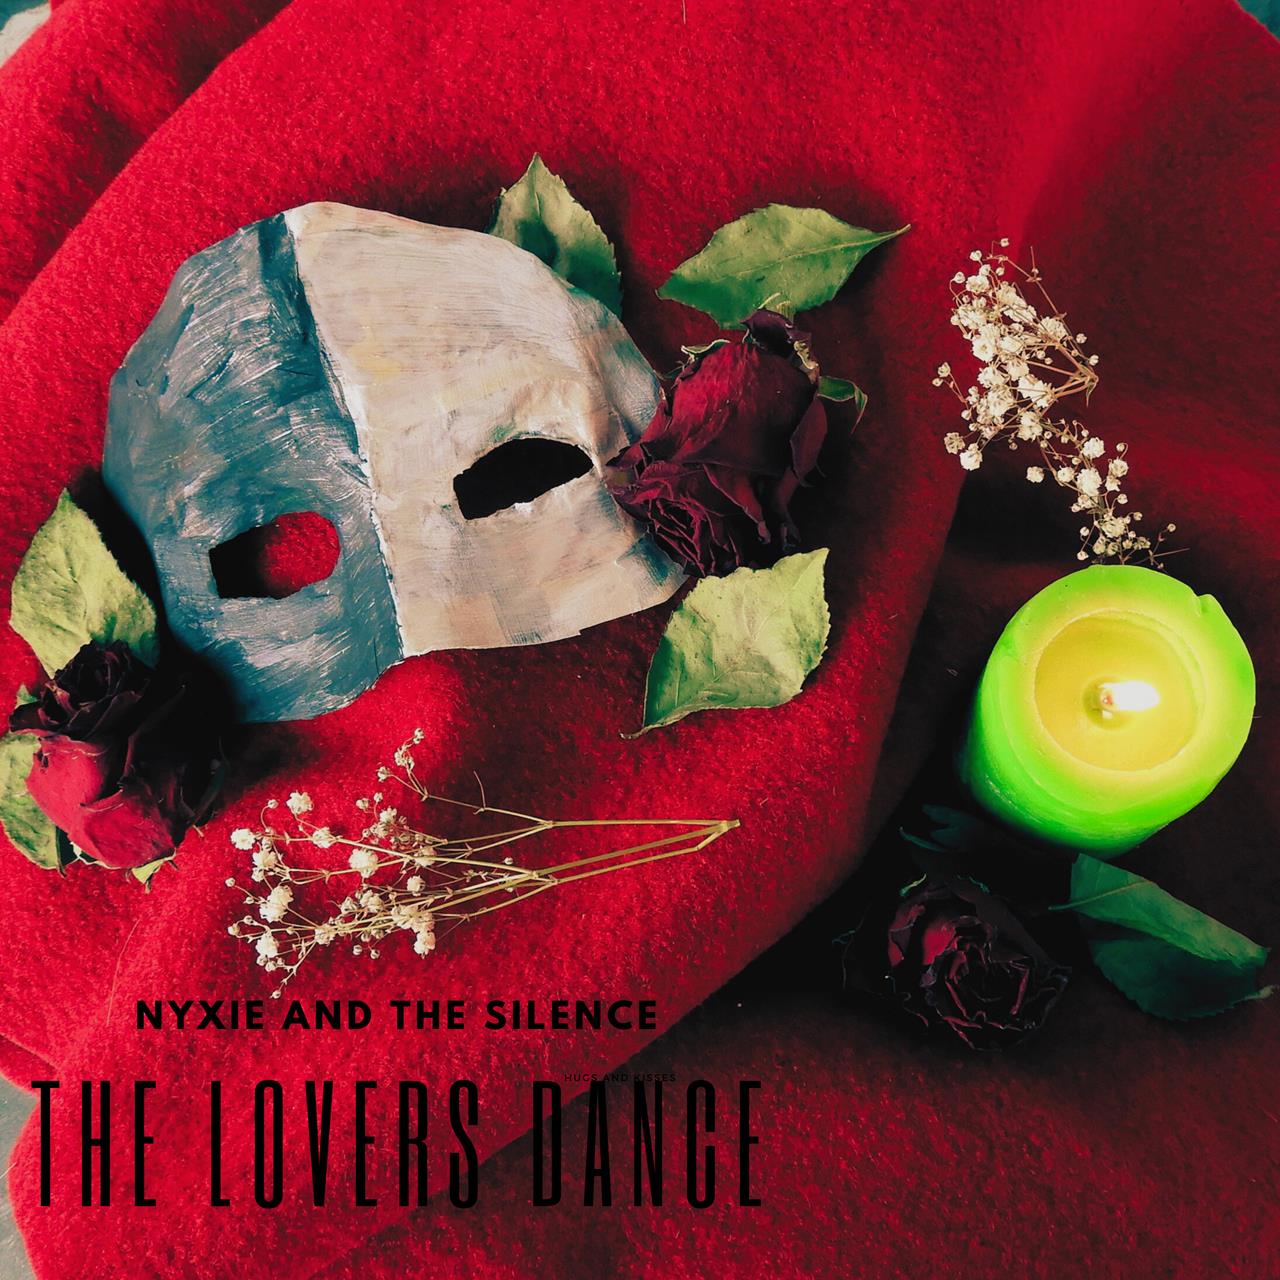 The lovers dance - cover art